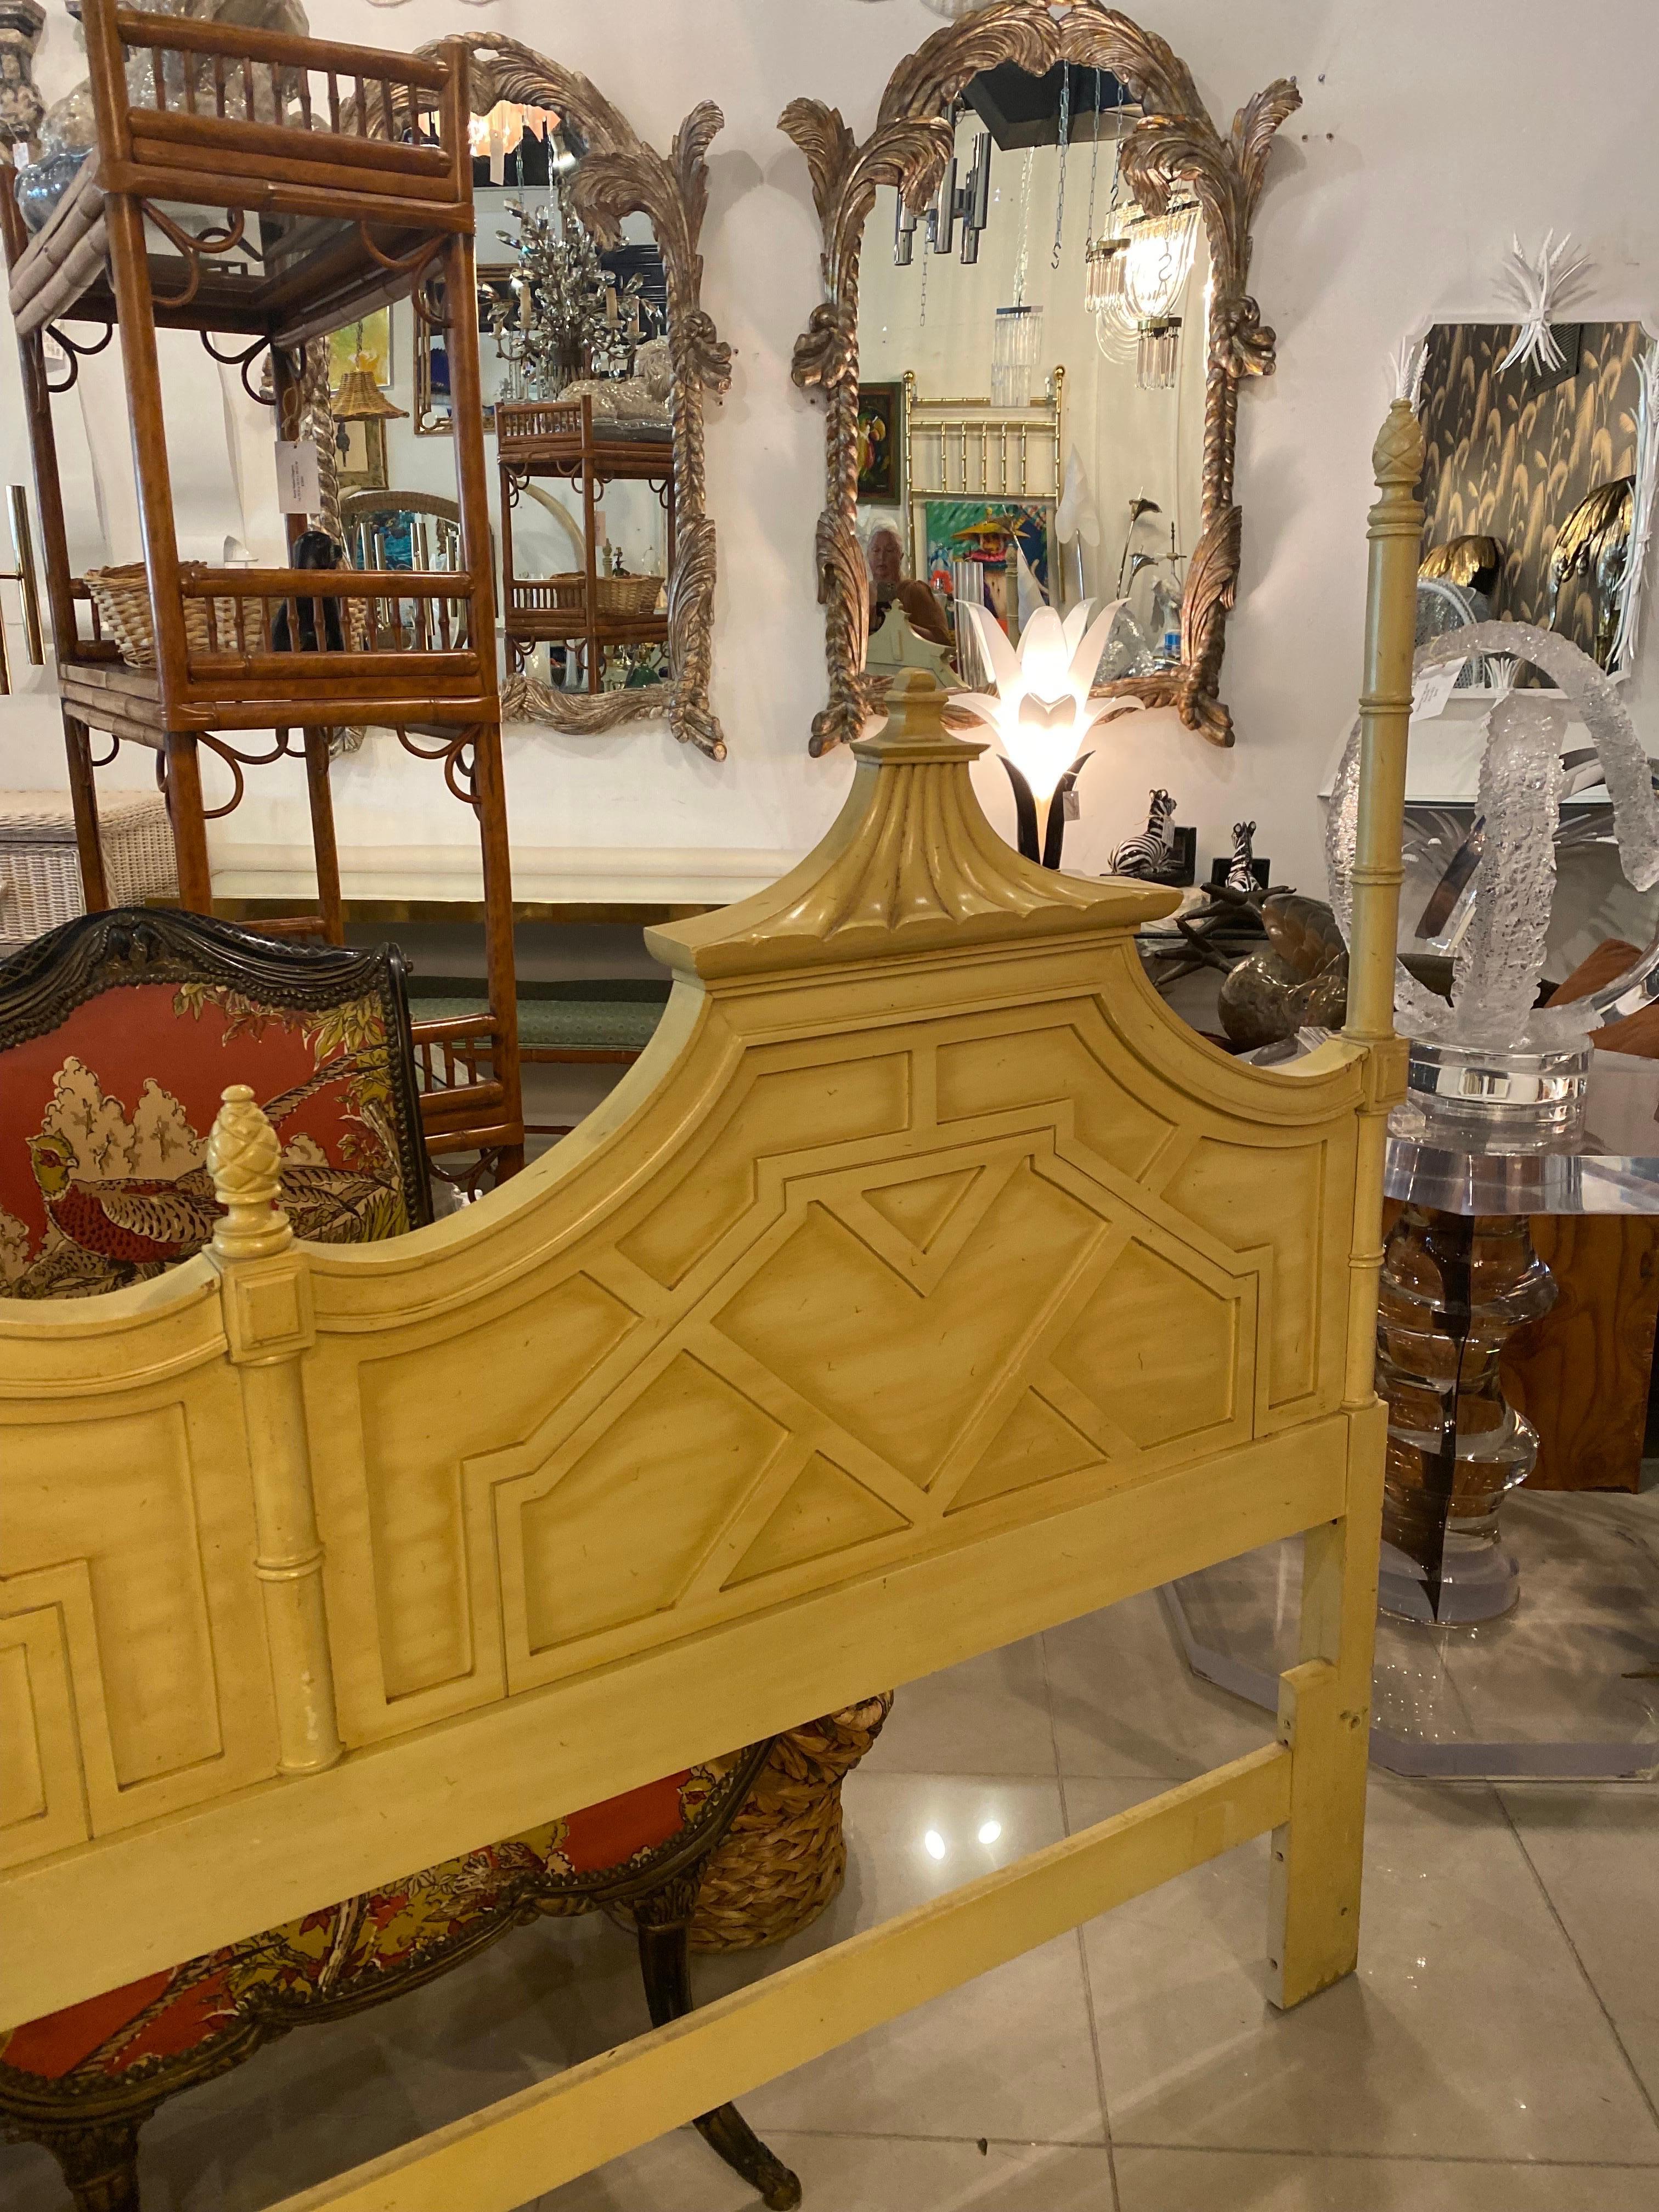 Beautiful vintage Thomasville pagoda, Chinese Chippendale, fretwork fret king size headboard. This incredible vintage headboard does not come around often! This is in its original finish and should be lacquered or painted. Has minor imperfections to